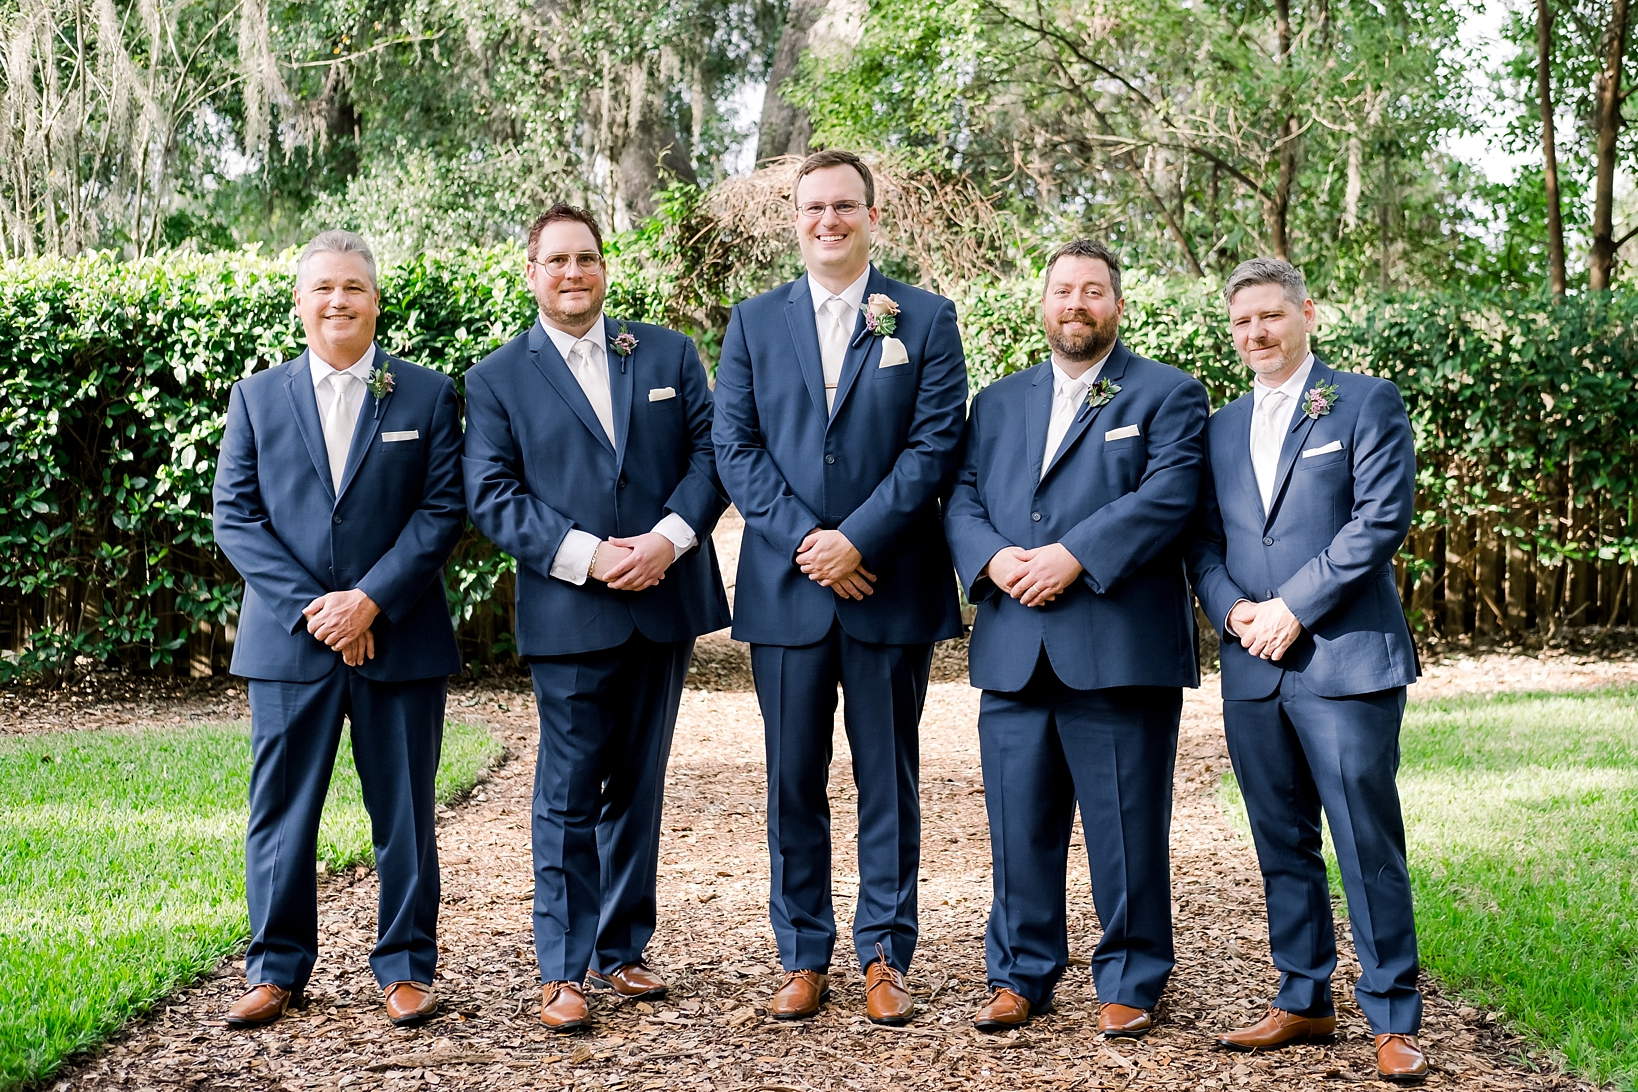 Groom and his Groomsmen pose for a formal photo on the mulch path